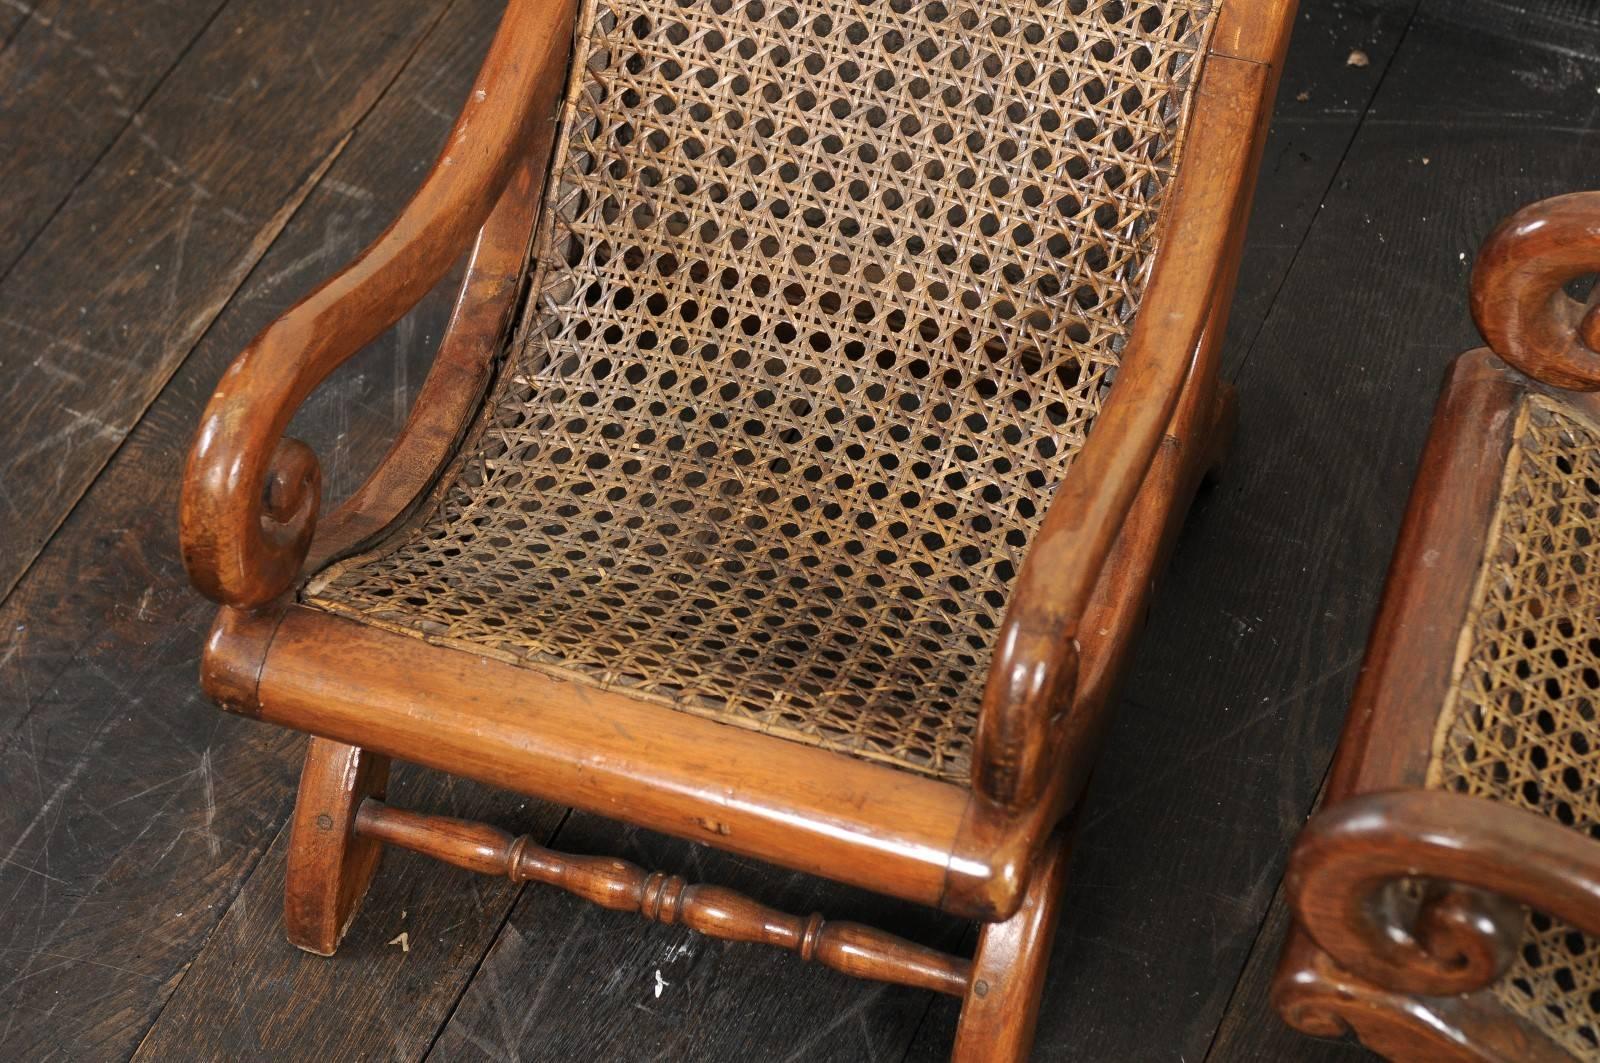 English 19th C. Children's Teak & Cane Chairs -Great Decor Accents or Display! For Sale 5